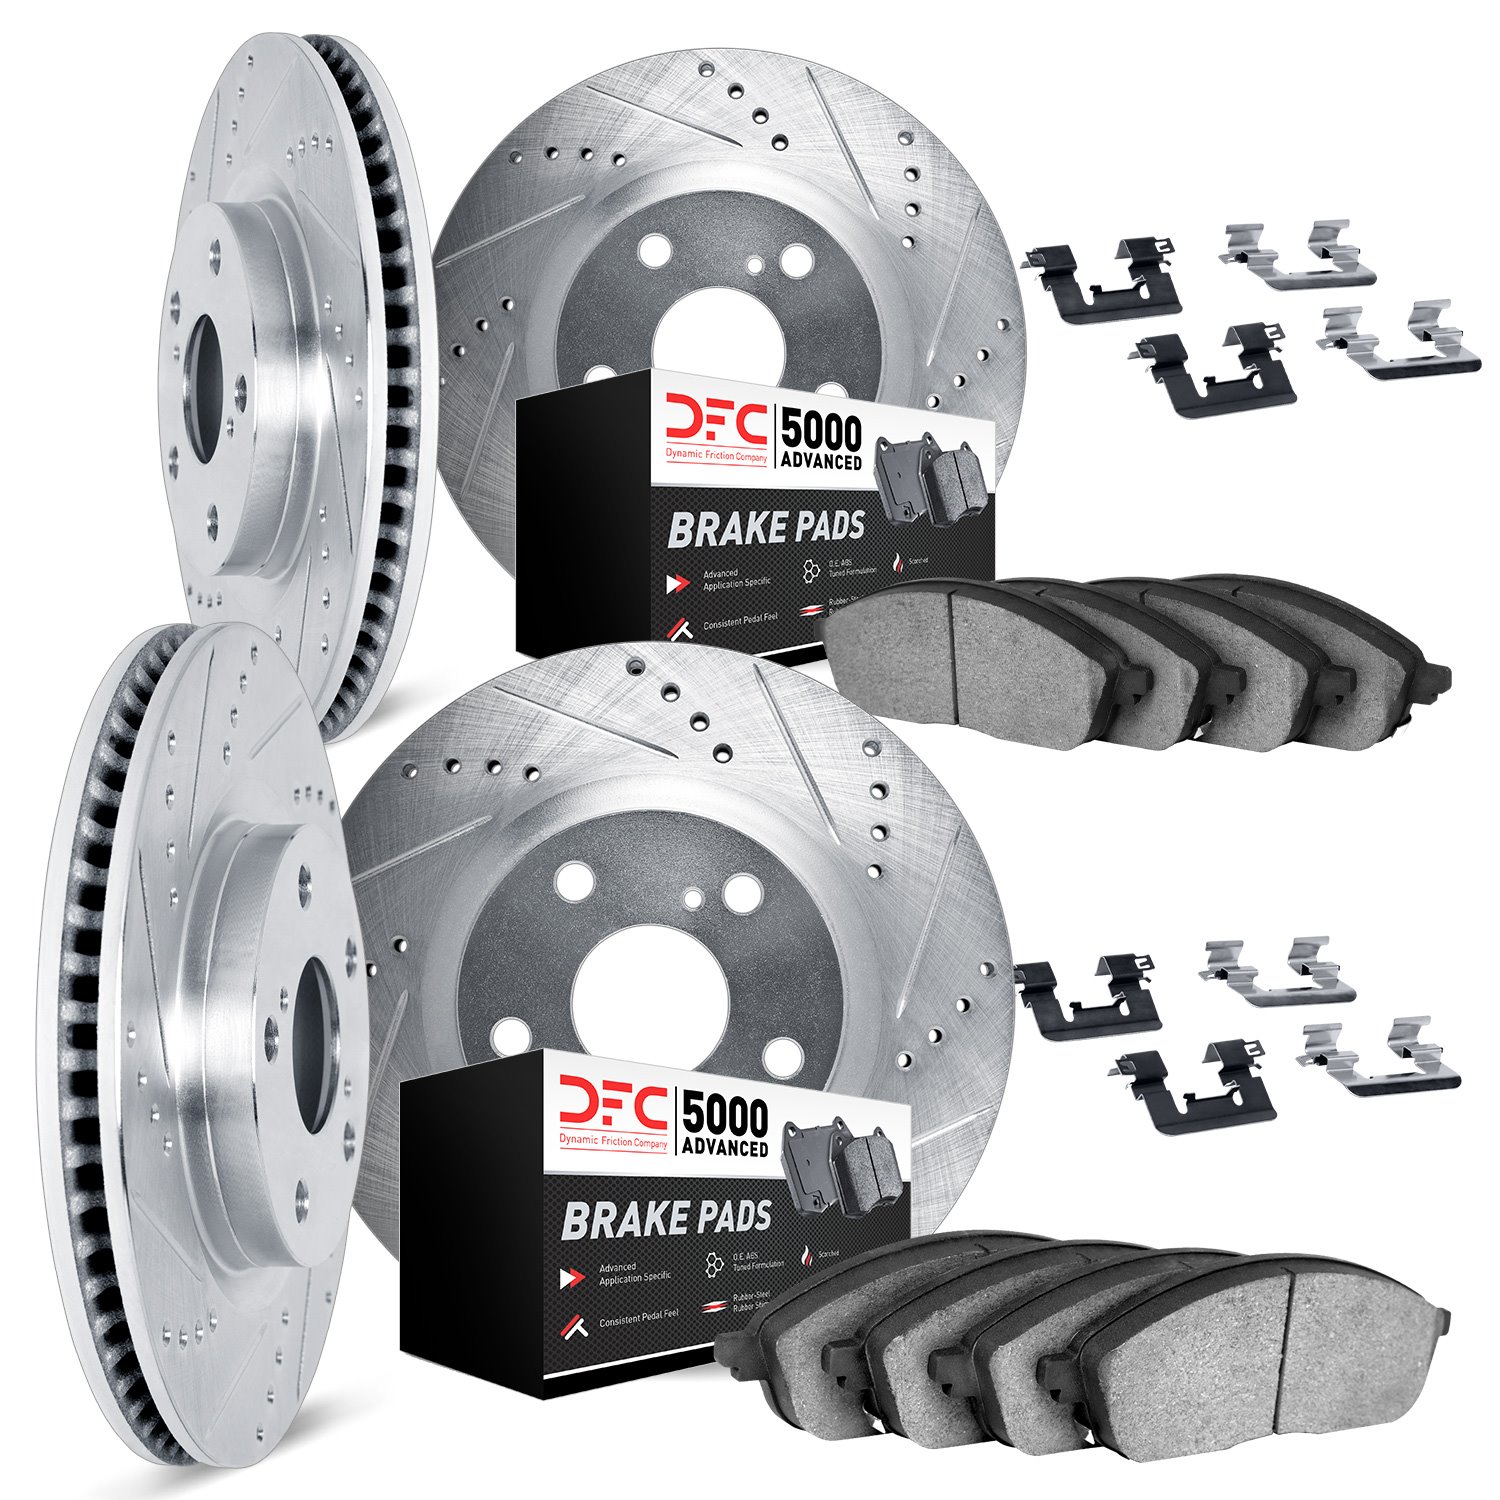 7514-54405 Drilled/Slotted Brake Rotors w/5000 Advanced Brake Pads Kit & Hardware [Silver], Fits Select Ford/Lincoln/Mercury/Maz